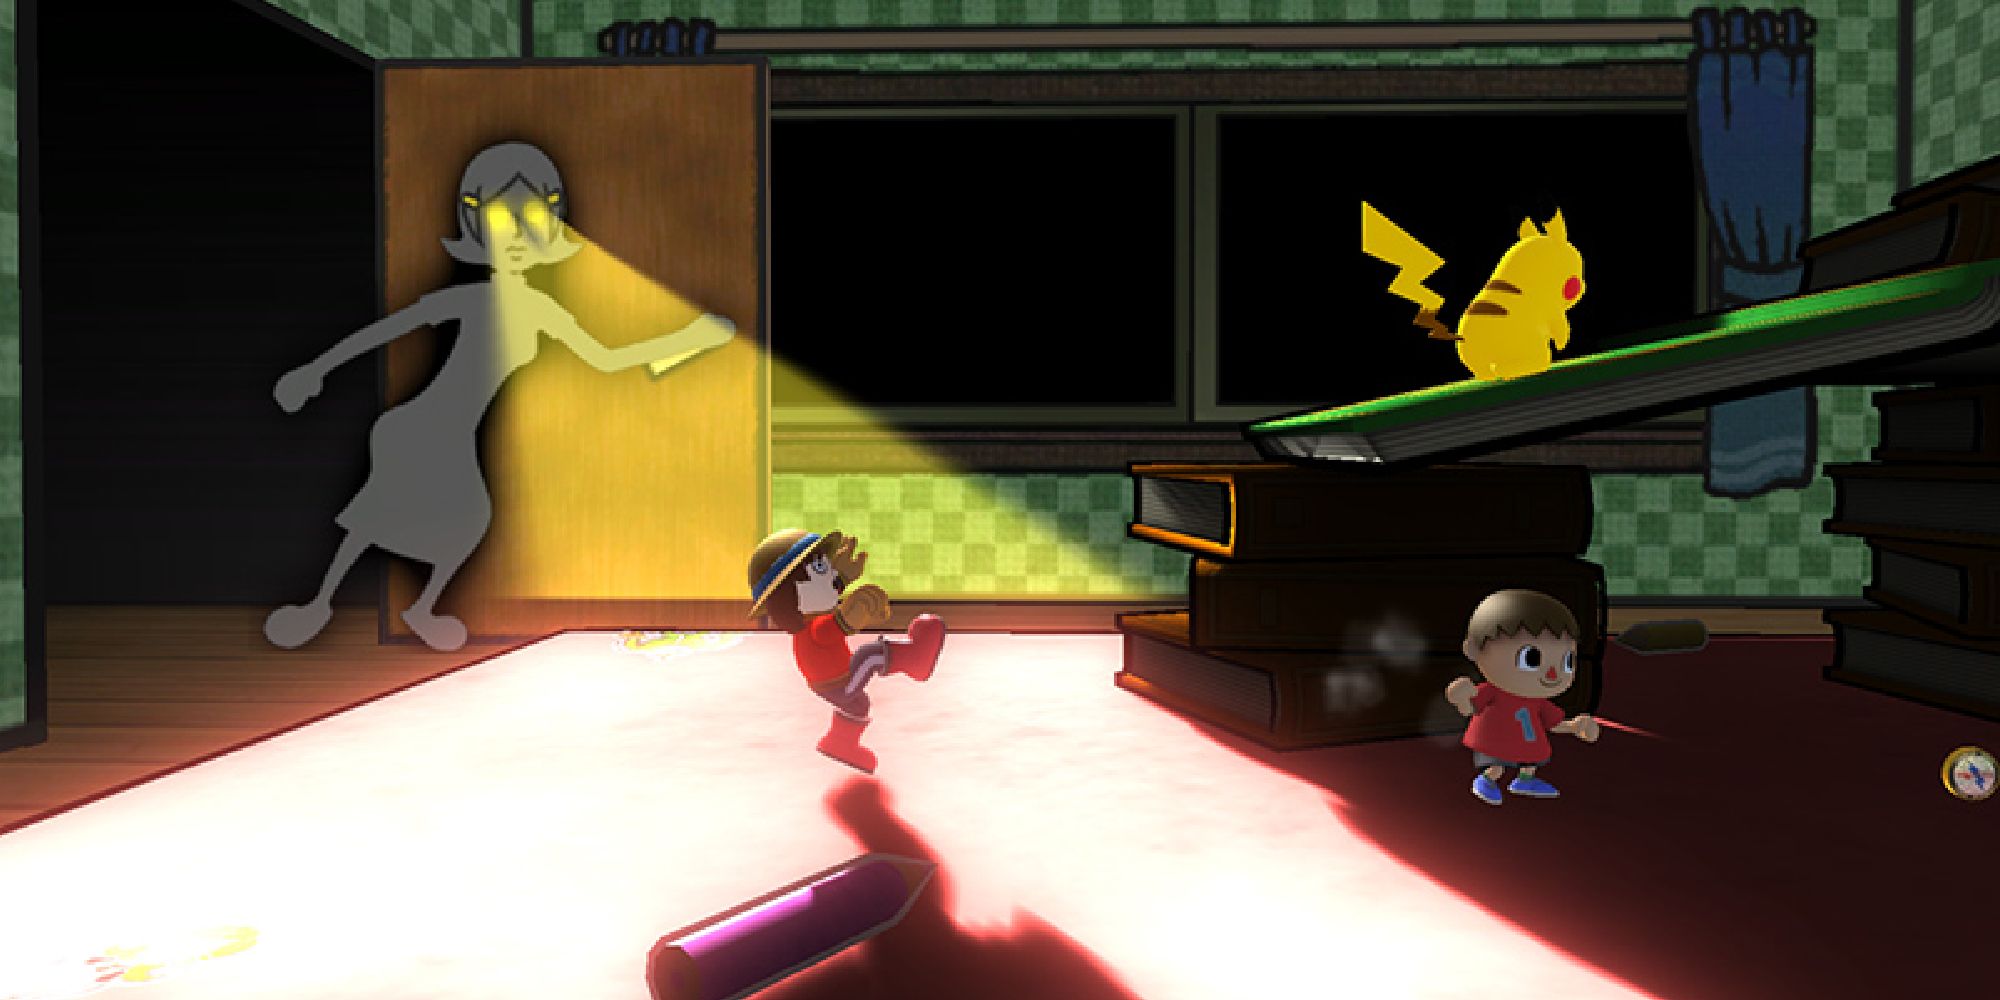 A Mii Brawler being spotted by 5-Volt on the Gamer stage in Smash Wii U